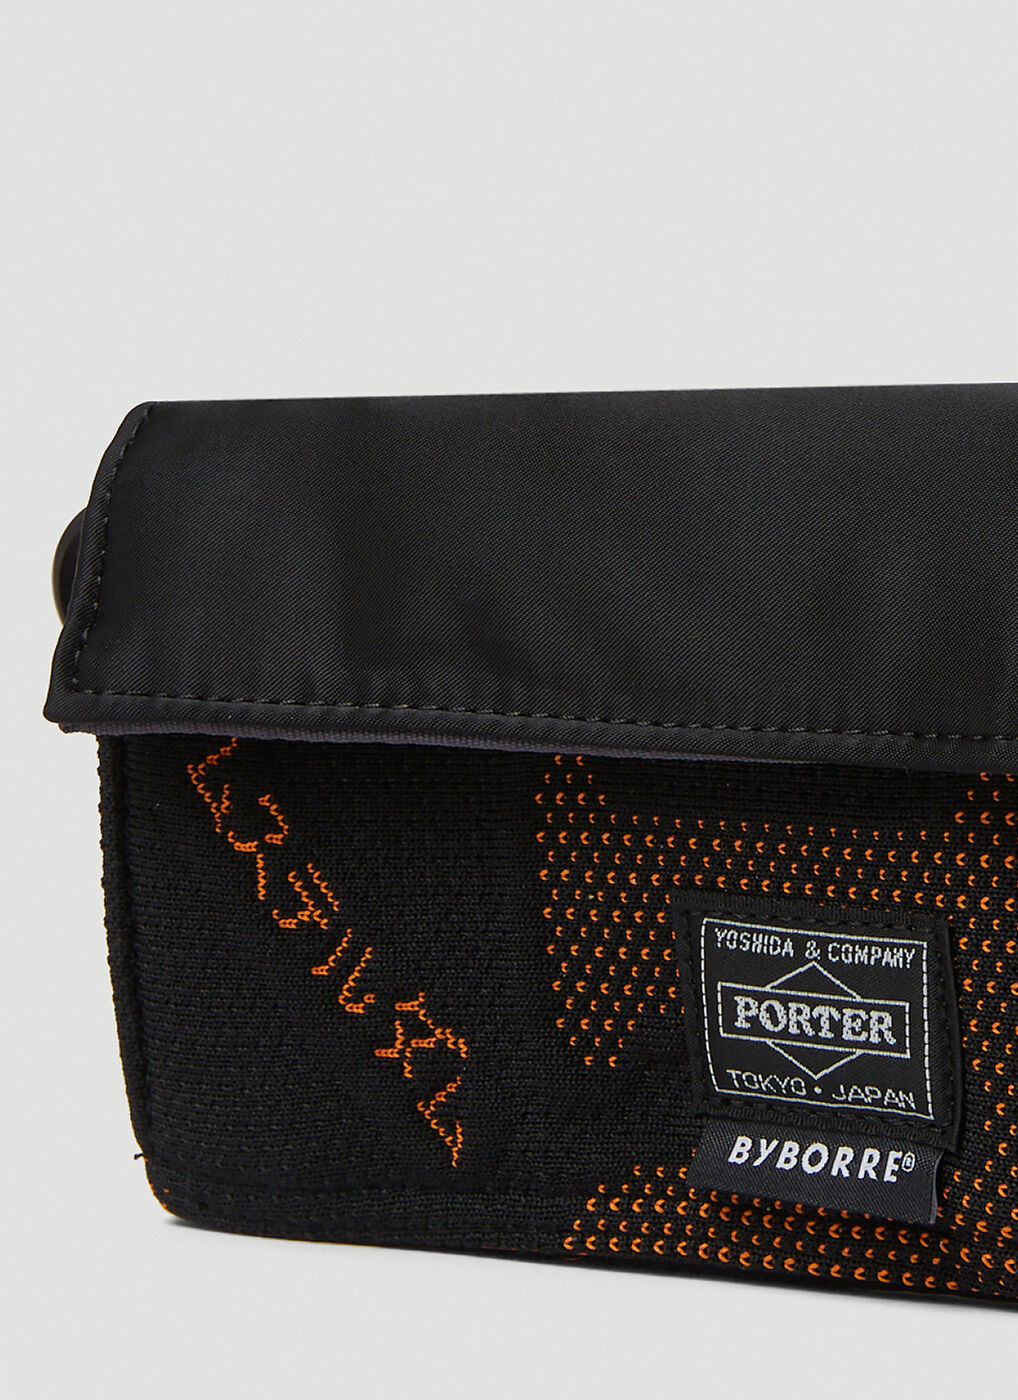 Porter-Yoshida and Co X Byborre Logo Patch Wallet in Black Womens Mens Accessories Mens Wallets and cardholders 